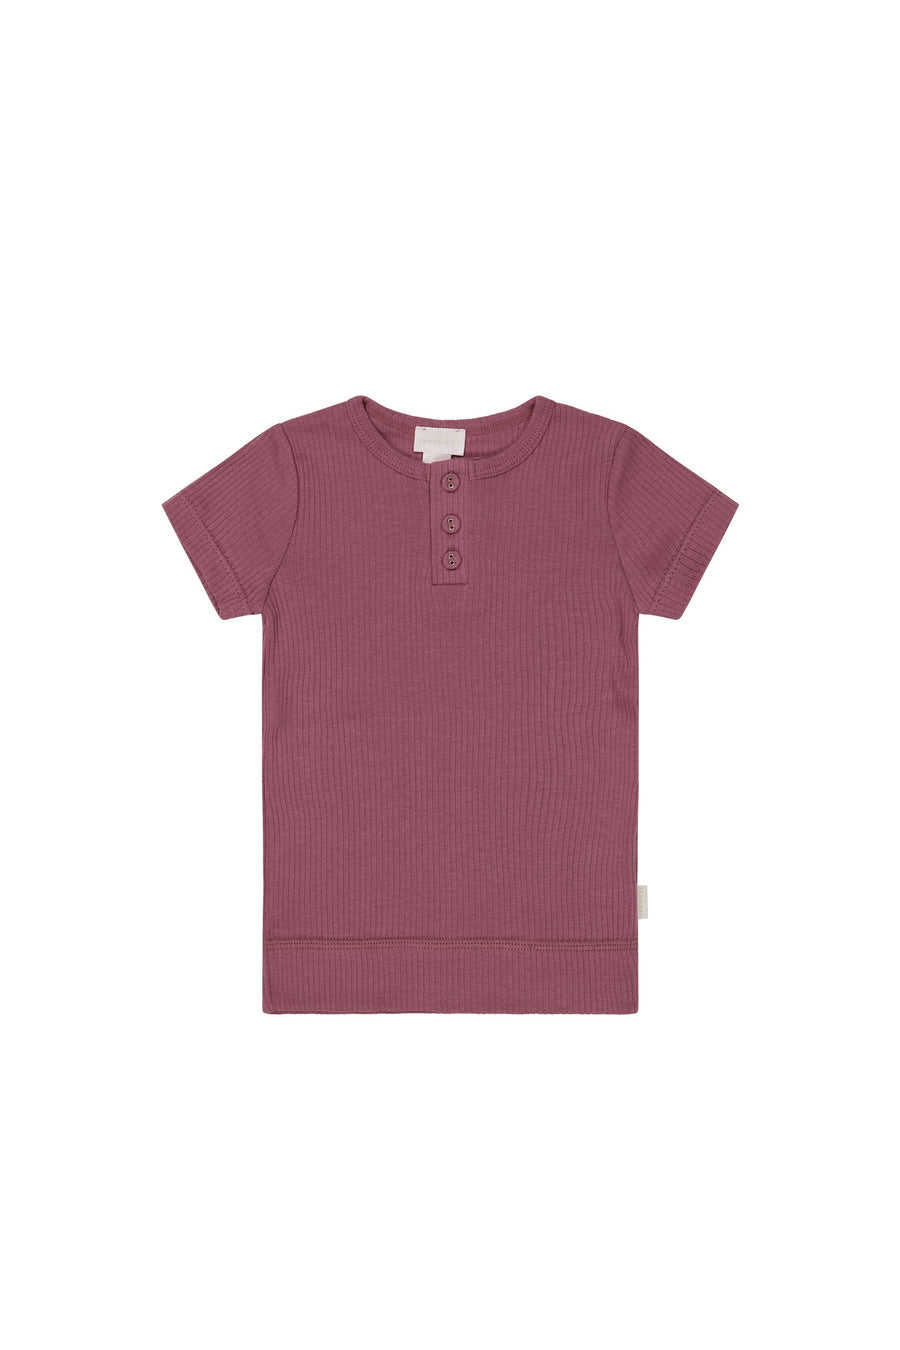 Organic Cotton Modal Henley Tee - Heather Childrens Top from Jamie Kay USA